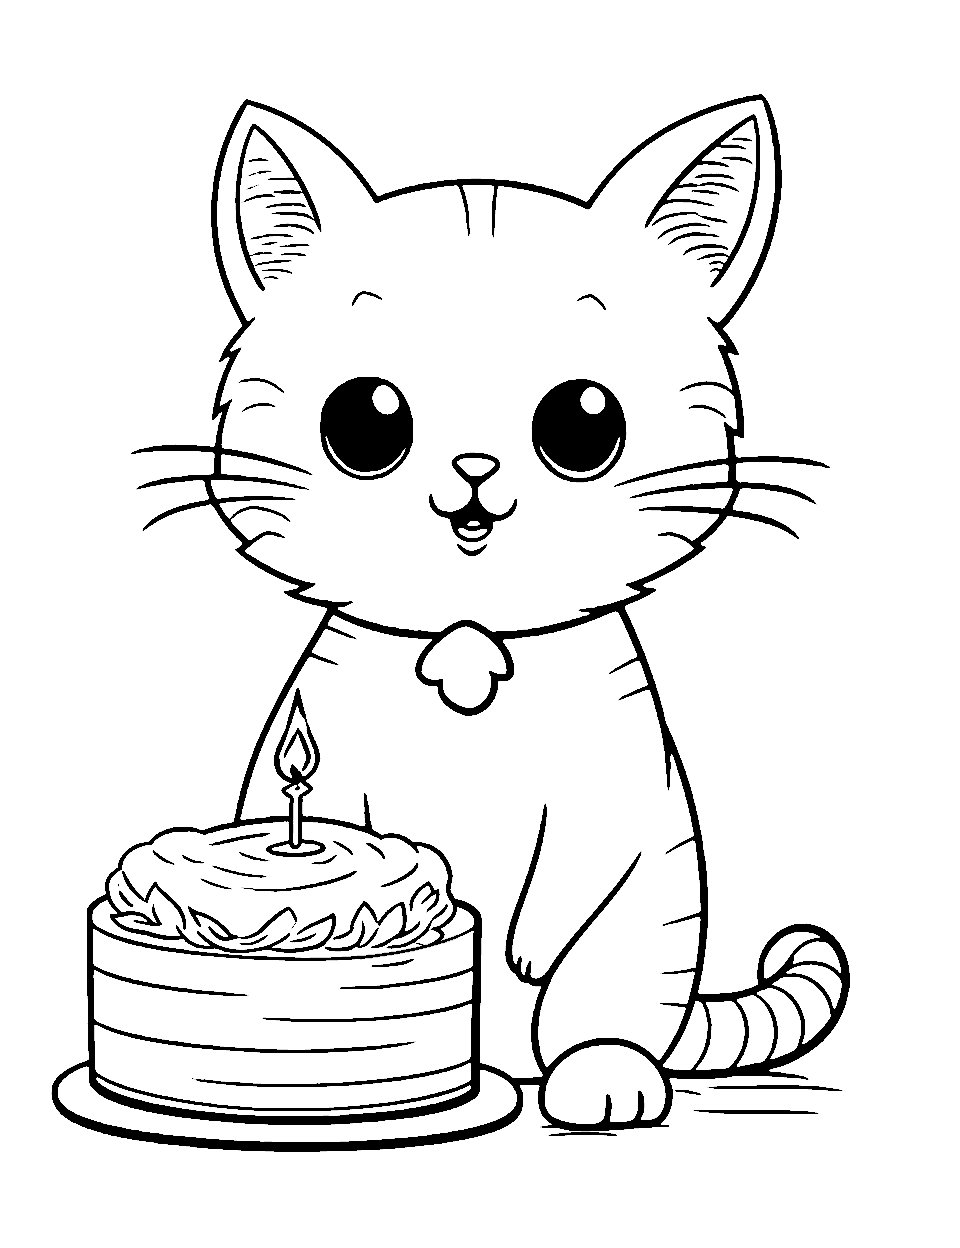 Happy Birthday, Kitty! Kitten Coloring Page - A kitten sitting behind a birthday cake with one candle.